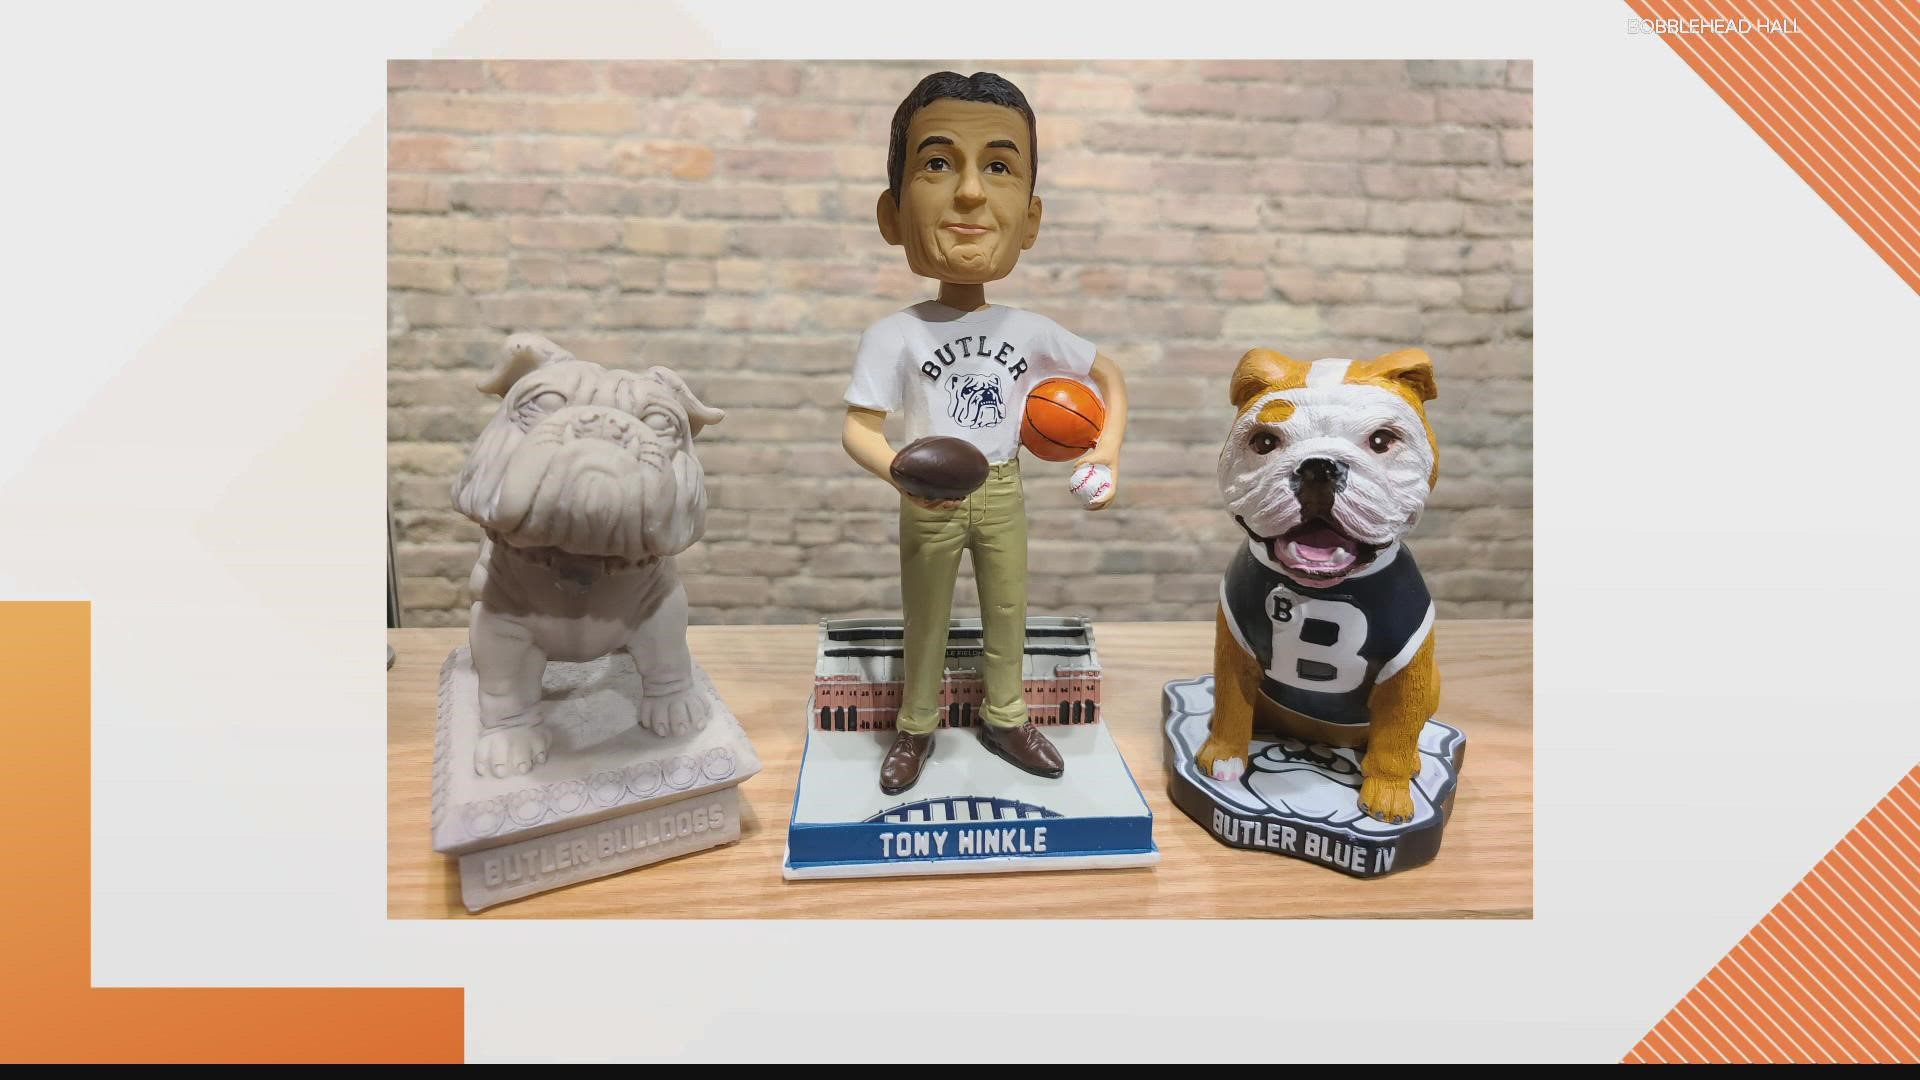 New bobbleheads featuring Butler University icons were introduced Friday on National Bobblehead Day.